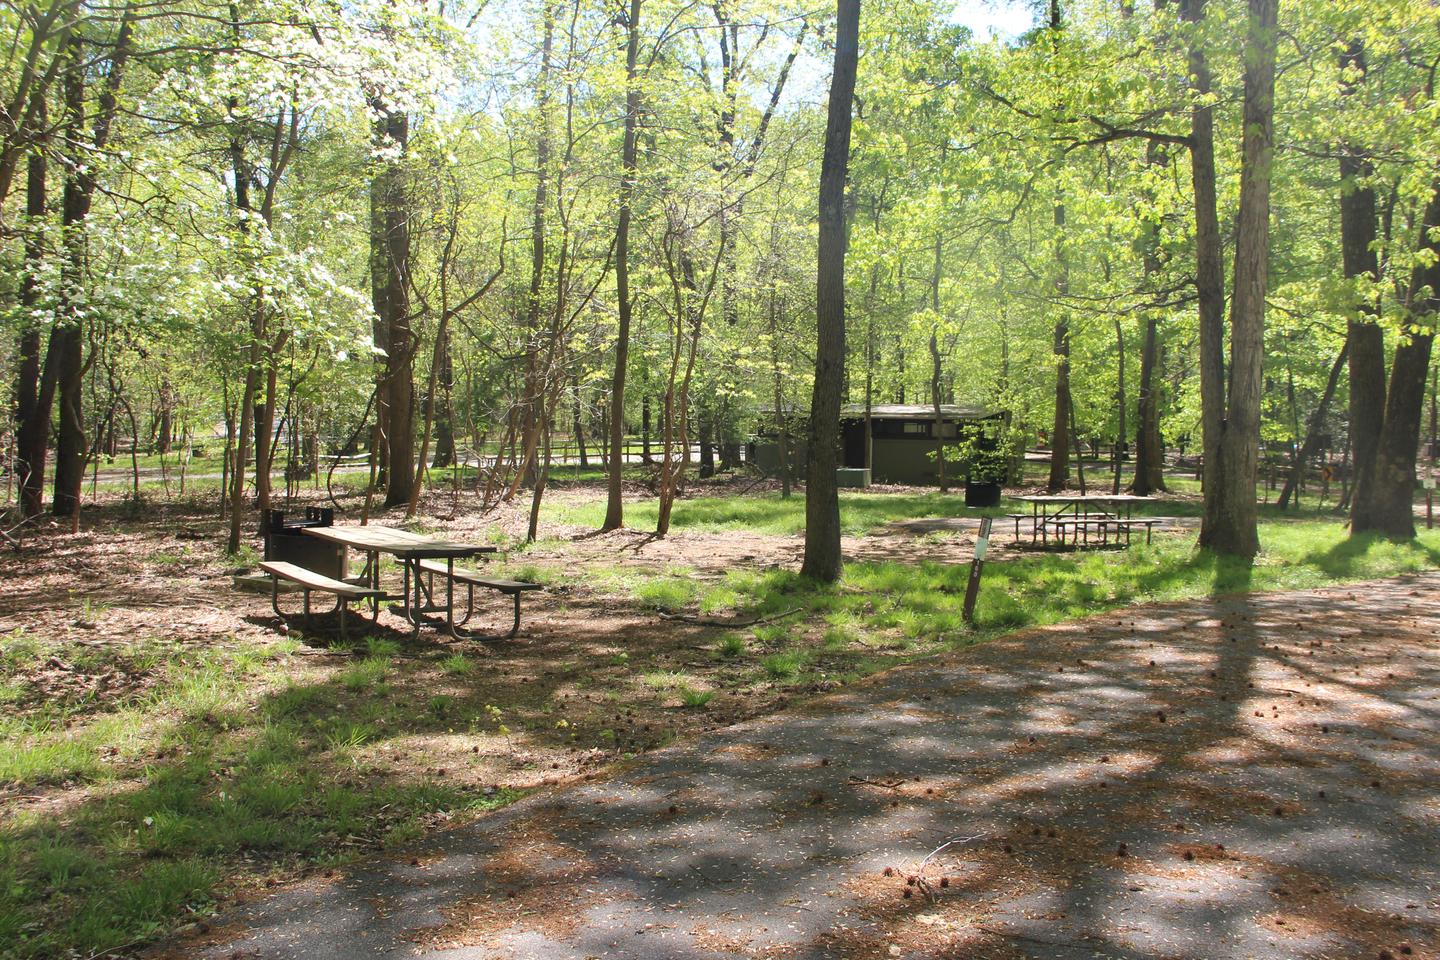 D 158 D Loop of the Greenbelt Park Maryland campground